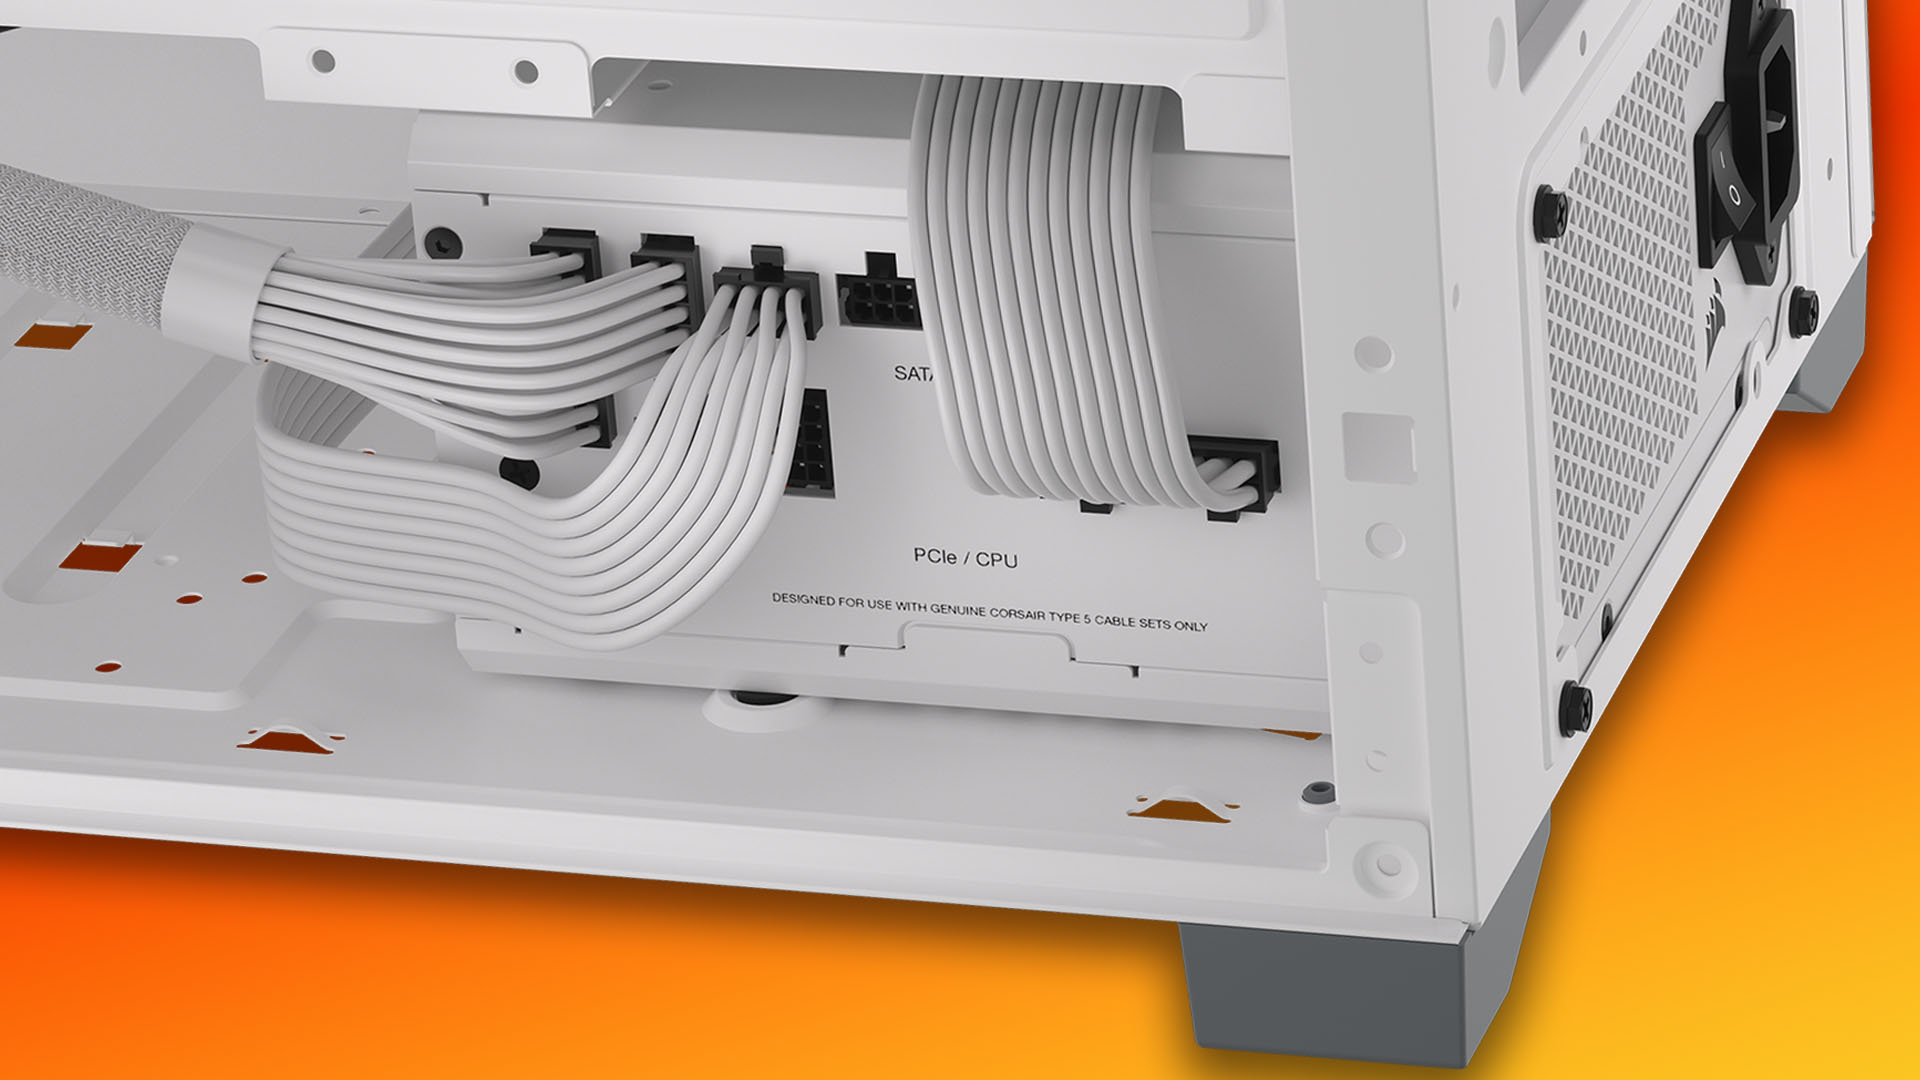 Hide the cables in your white PC build with Corsair's clever new PSUs